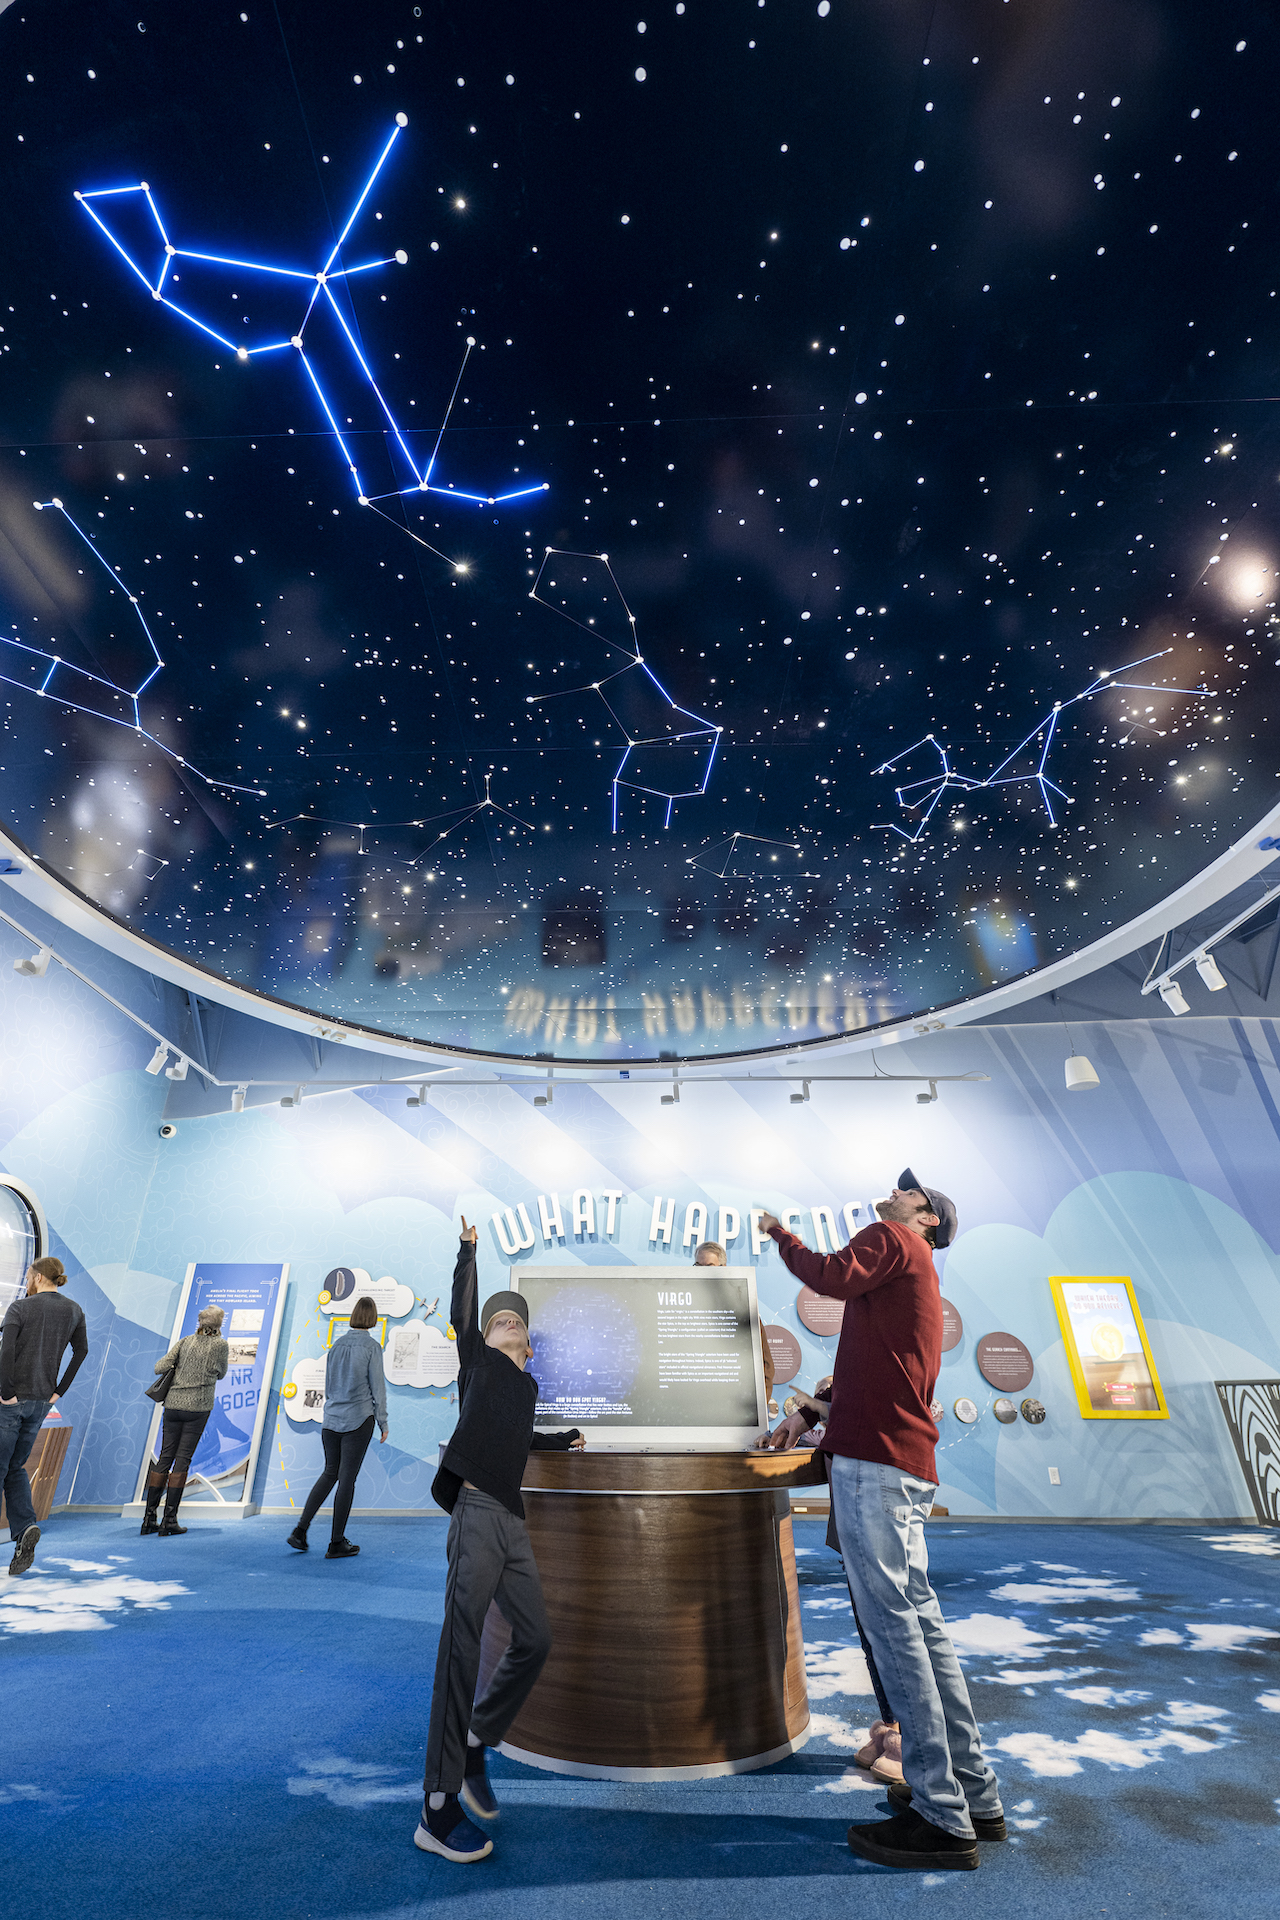 Visitors can light up constellations to see how they guided Amelia and across the night sky. Photos courtesy Amelia Earhart Hangar Museum